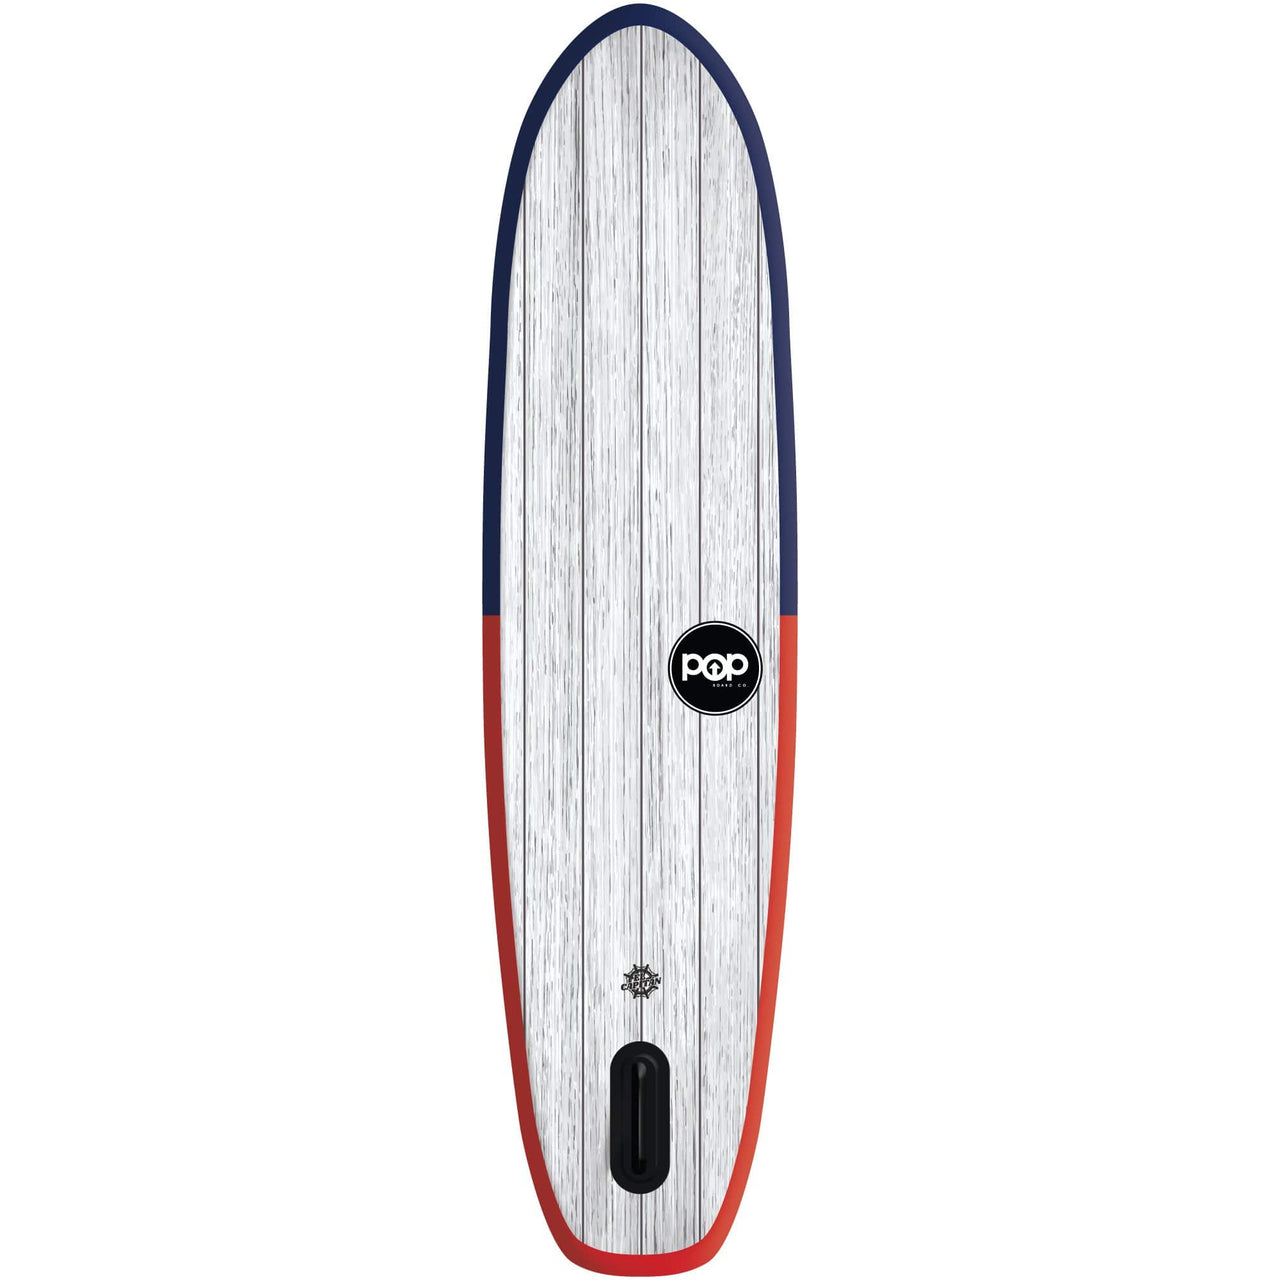 POP Board Co 11'6" El Capitán Stand Up Paddle Board - Red/Blue - Good Wave Canada